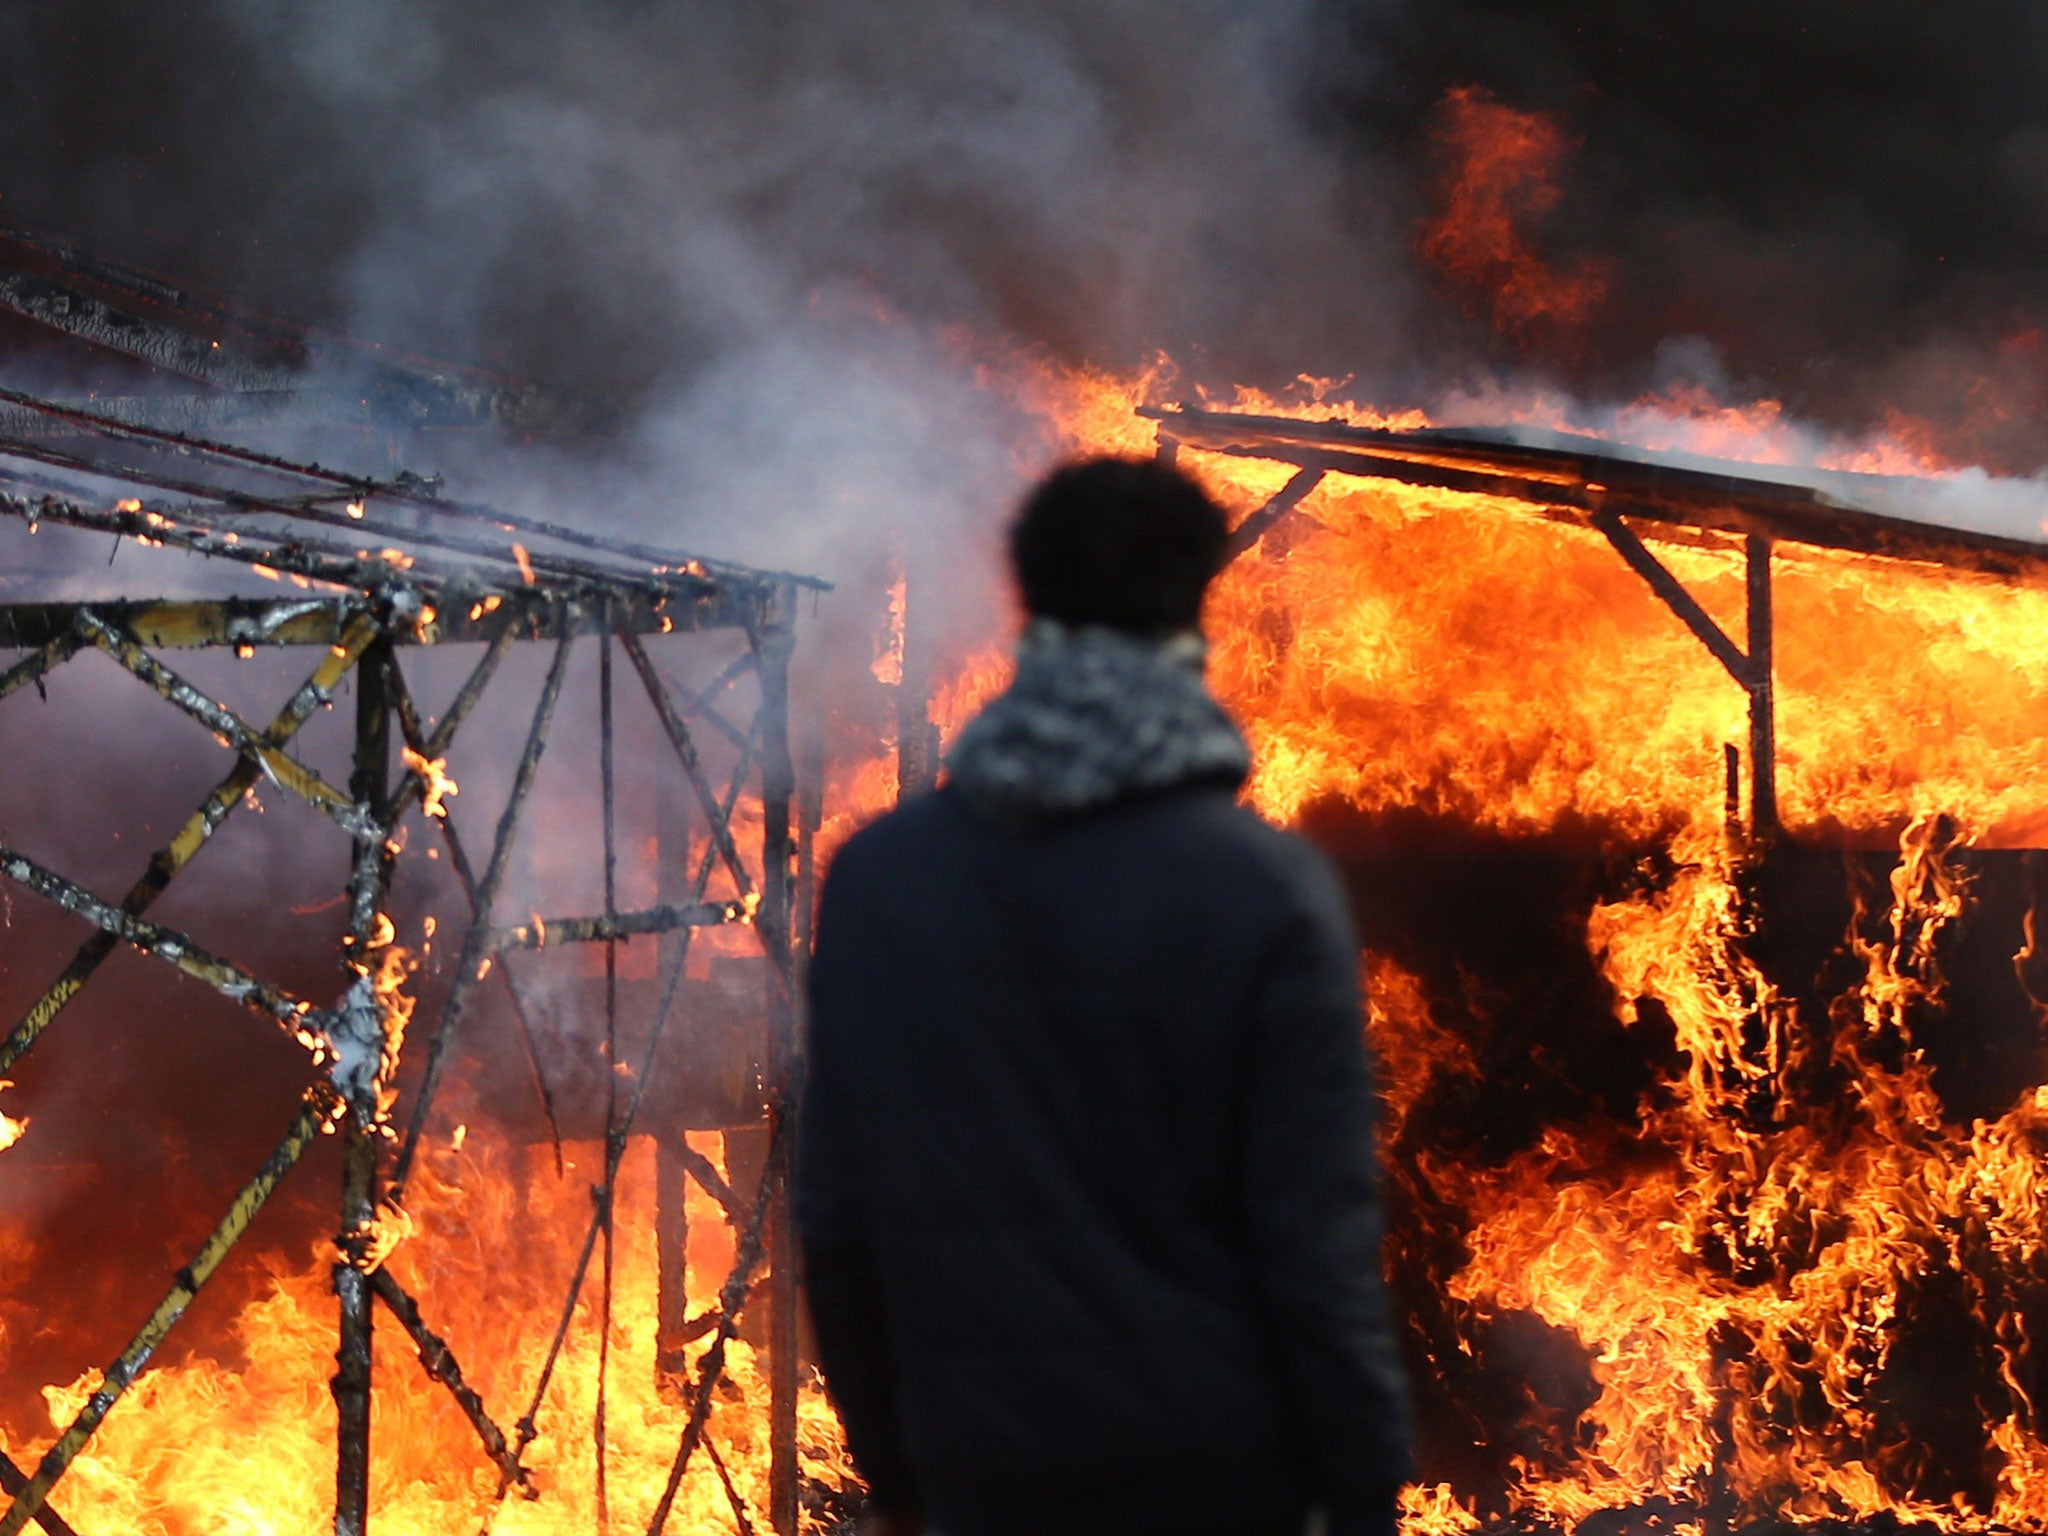 Migrants watch a hut burn as police officers clear part of the 'jungle' migrant camp on February 29, 2016 in Calais, France